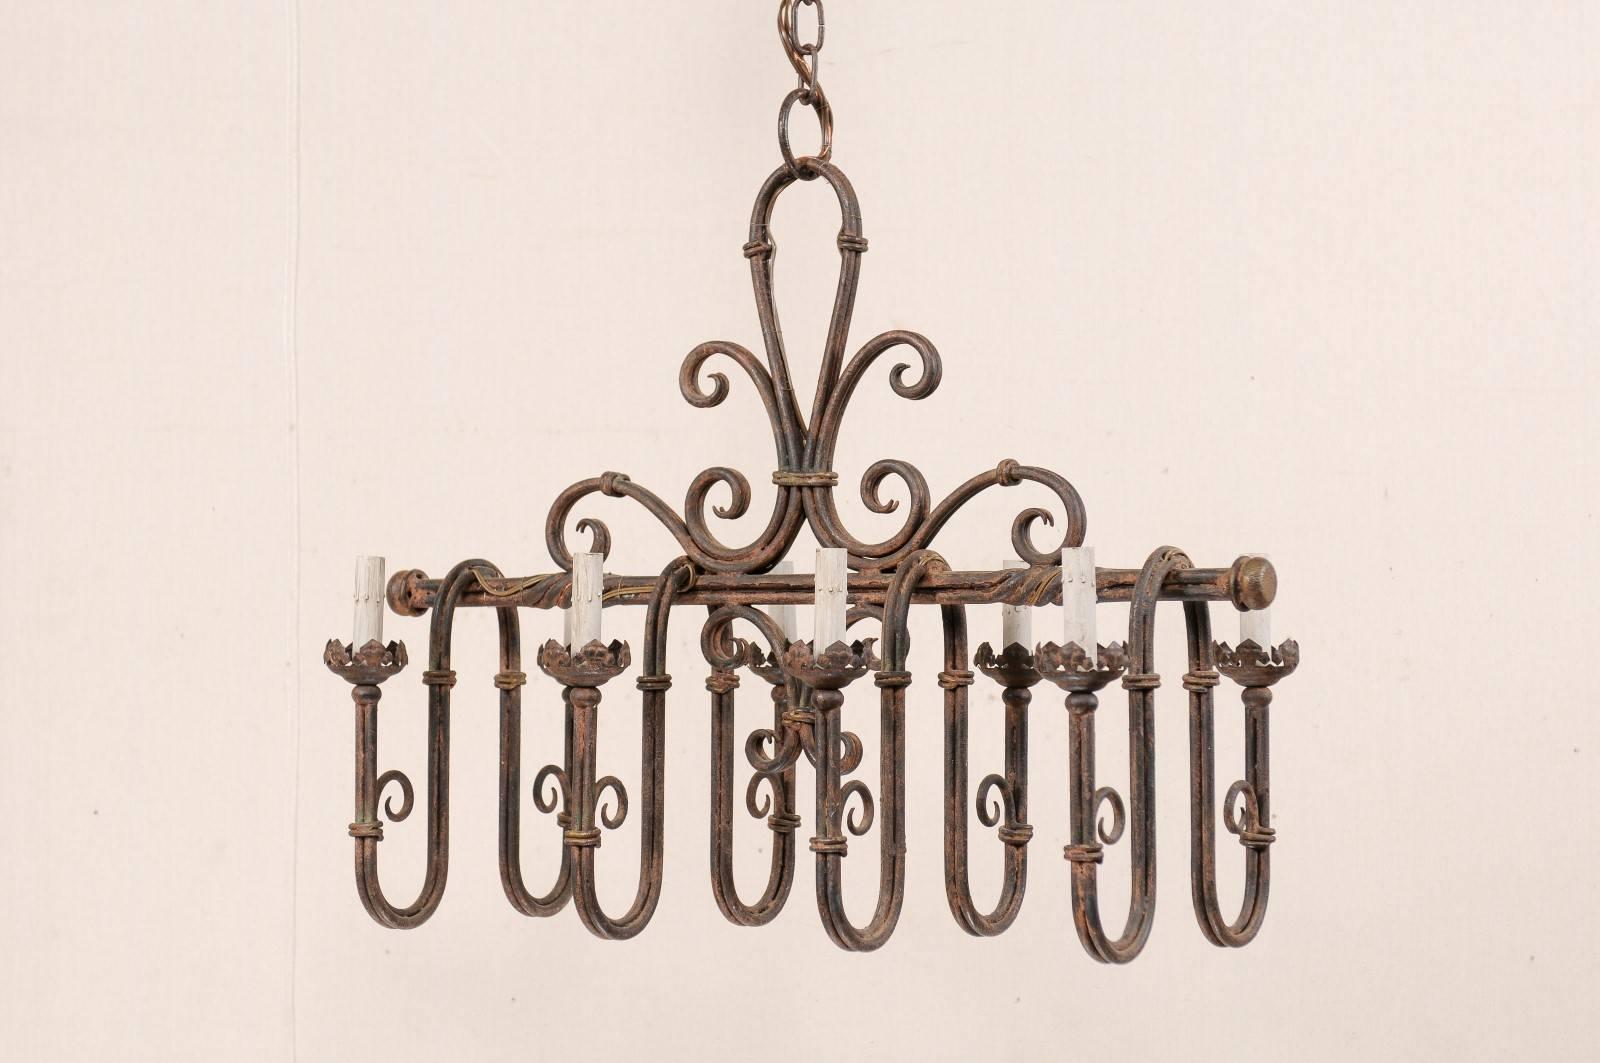 A vintage French eight-light iron chandelier. This French chandelier from the mid-20th century features an overall rectangular shape which is made up of a horizontally positioned metal center beam with twists and has deeply swagged iron arms which